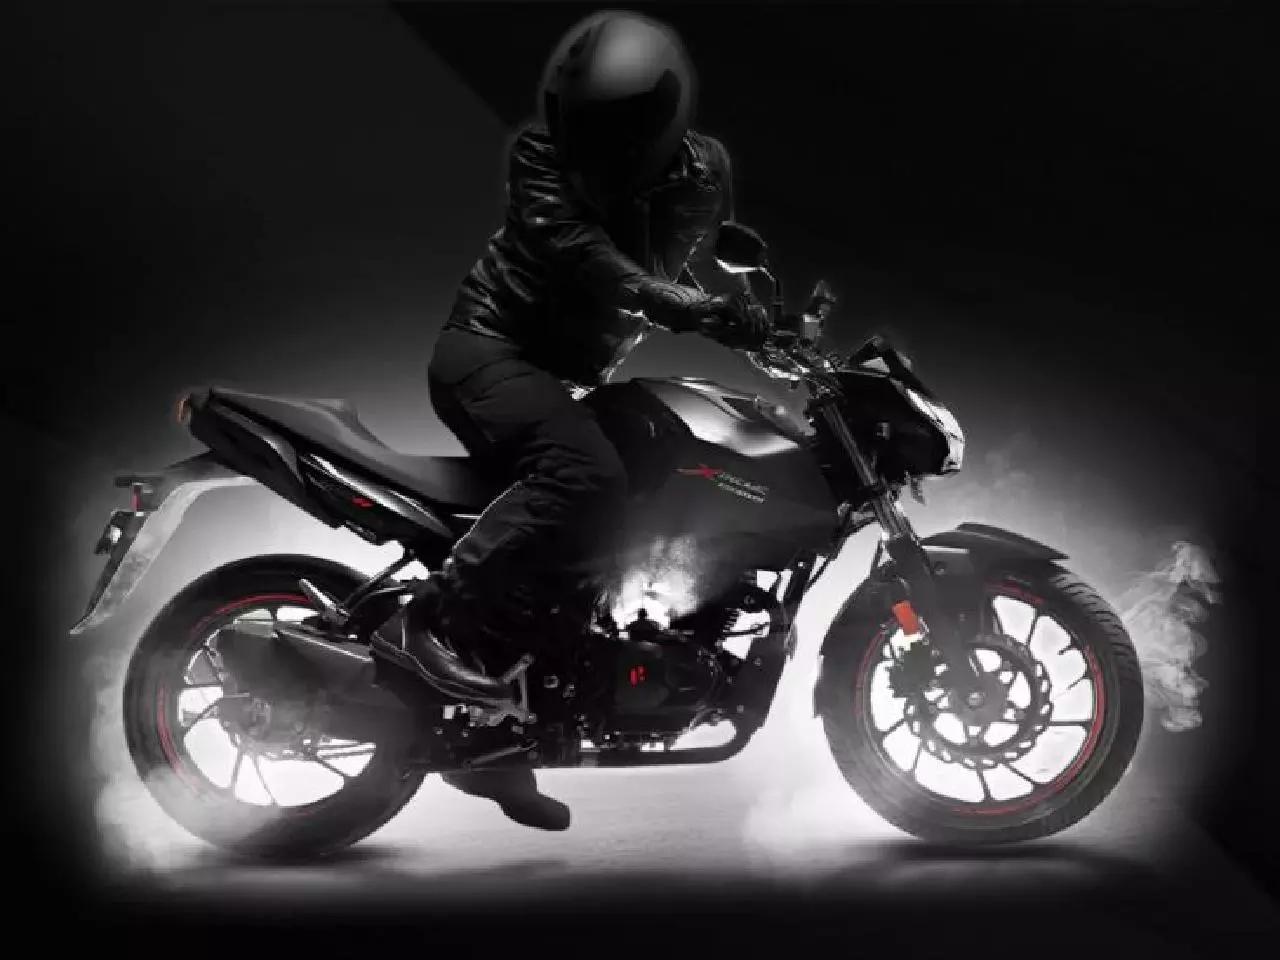 Hero Xtreme 160R Stealth 2.0 launched in India, Priced at 1.28 Lakh